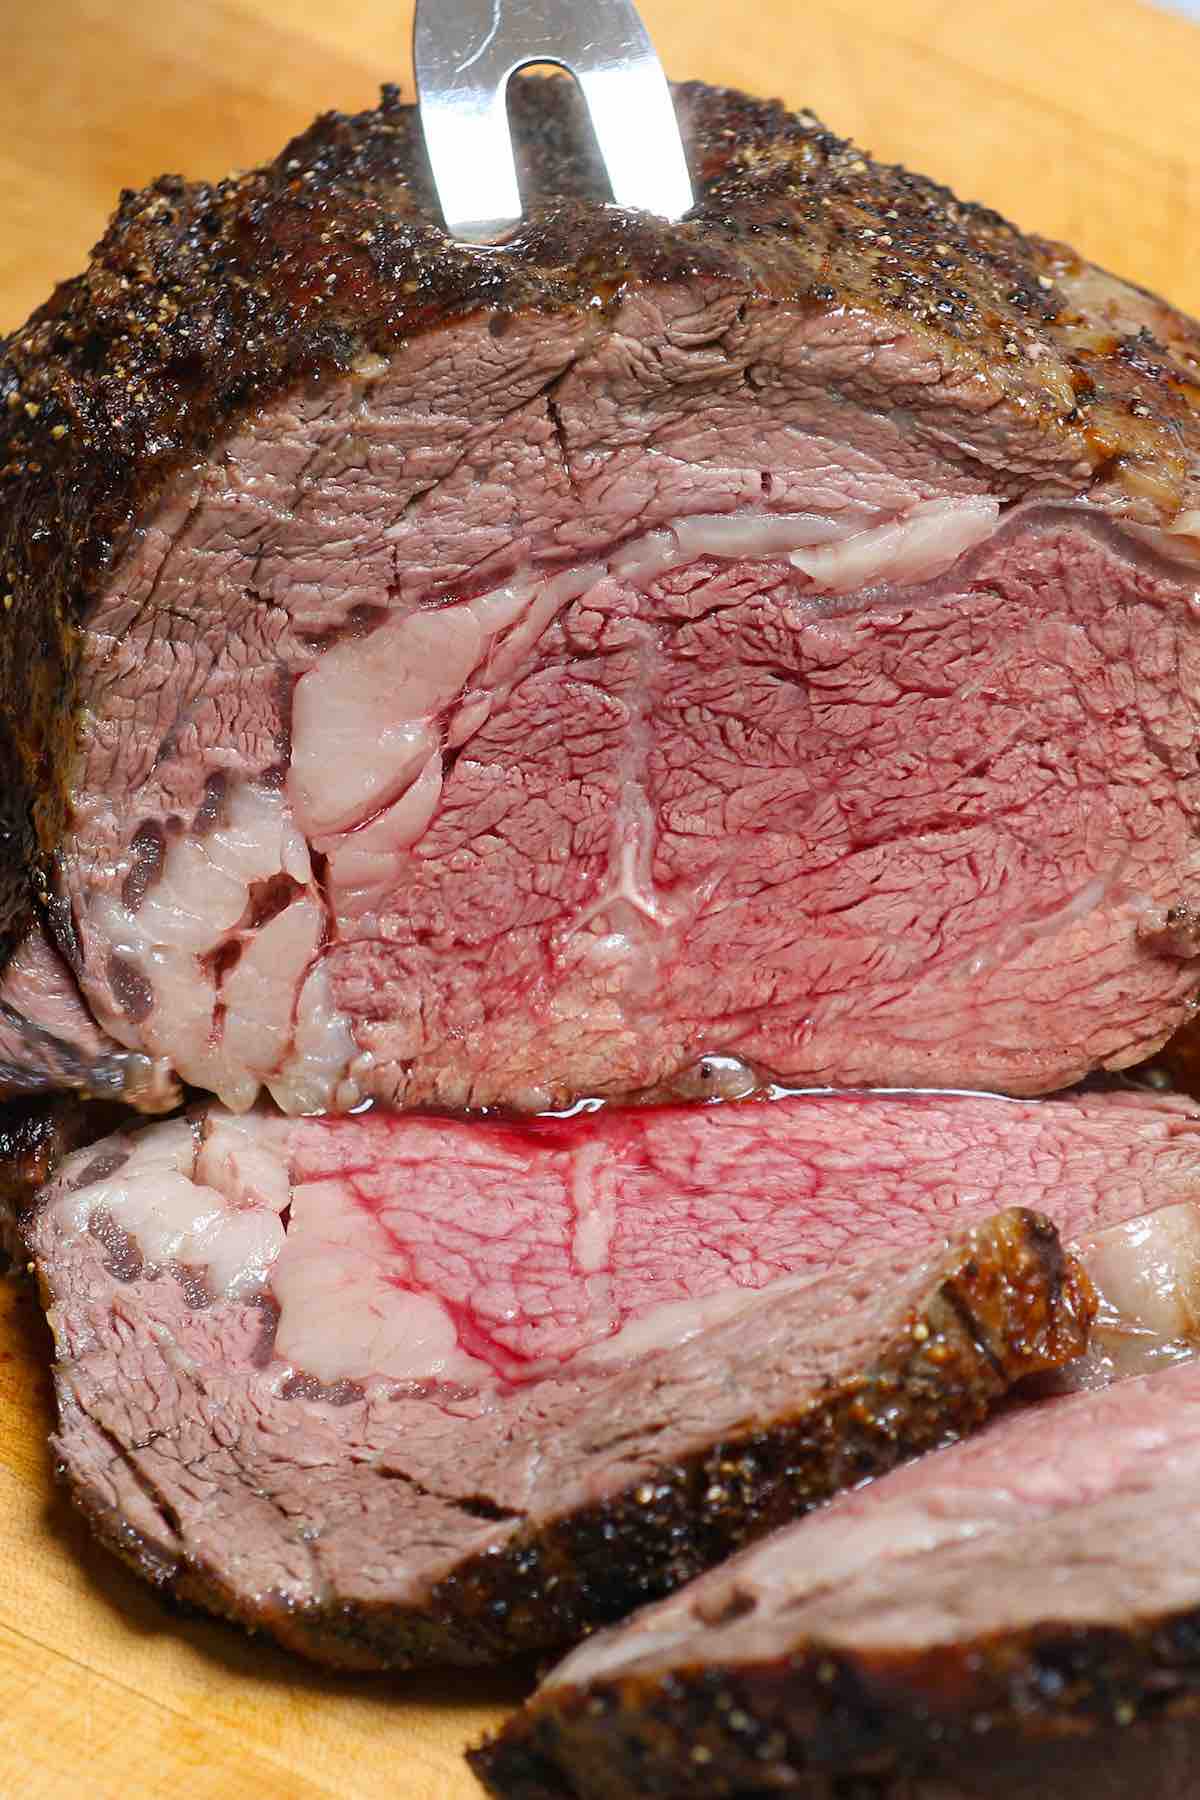 With a cut like prime rib, you want to ensure that it’s perfectly cooked. The meat will become dry if it’s cooked too long, and for those who prefer their beef rare, it has to cook well enough to be safe to eat. In this post, we’re sharing some tips on how to cook prime rib as well as a guide to the ideal internal temperature.